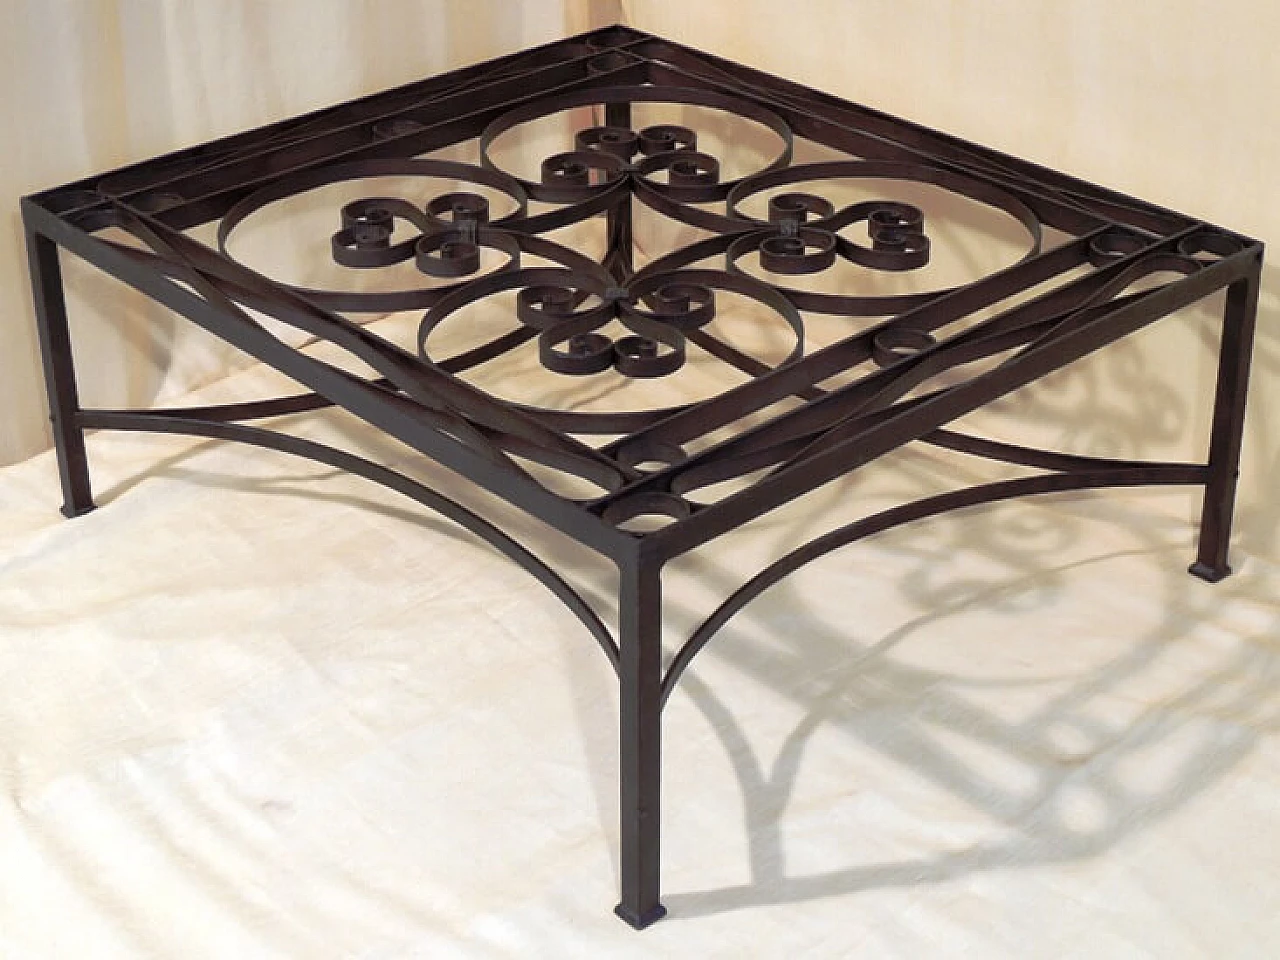 Coffee table created with wrought iron panel from the 1800's 1109444